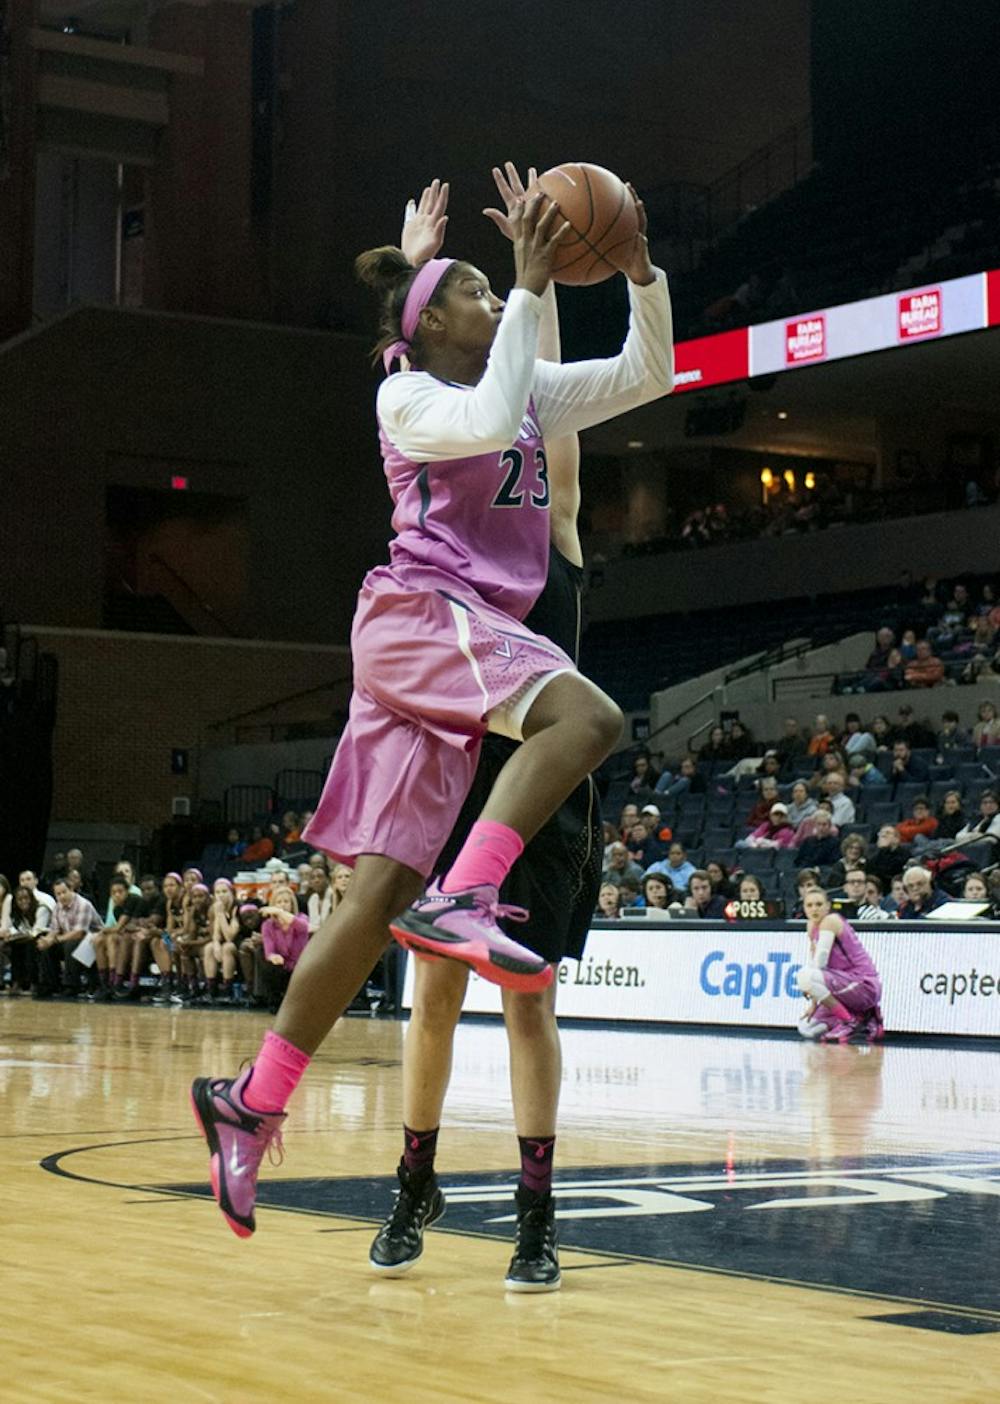 <p>Freshman forward Aliyah Huland El scored 12 points in the second half, when the Seminoles locked up freshman guard Mikayla Venson. The Cavaliers wore pink jerseys, socks and sneakers in support of breast cancer awareness. </p>